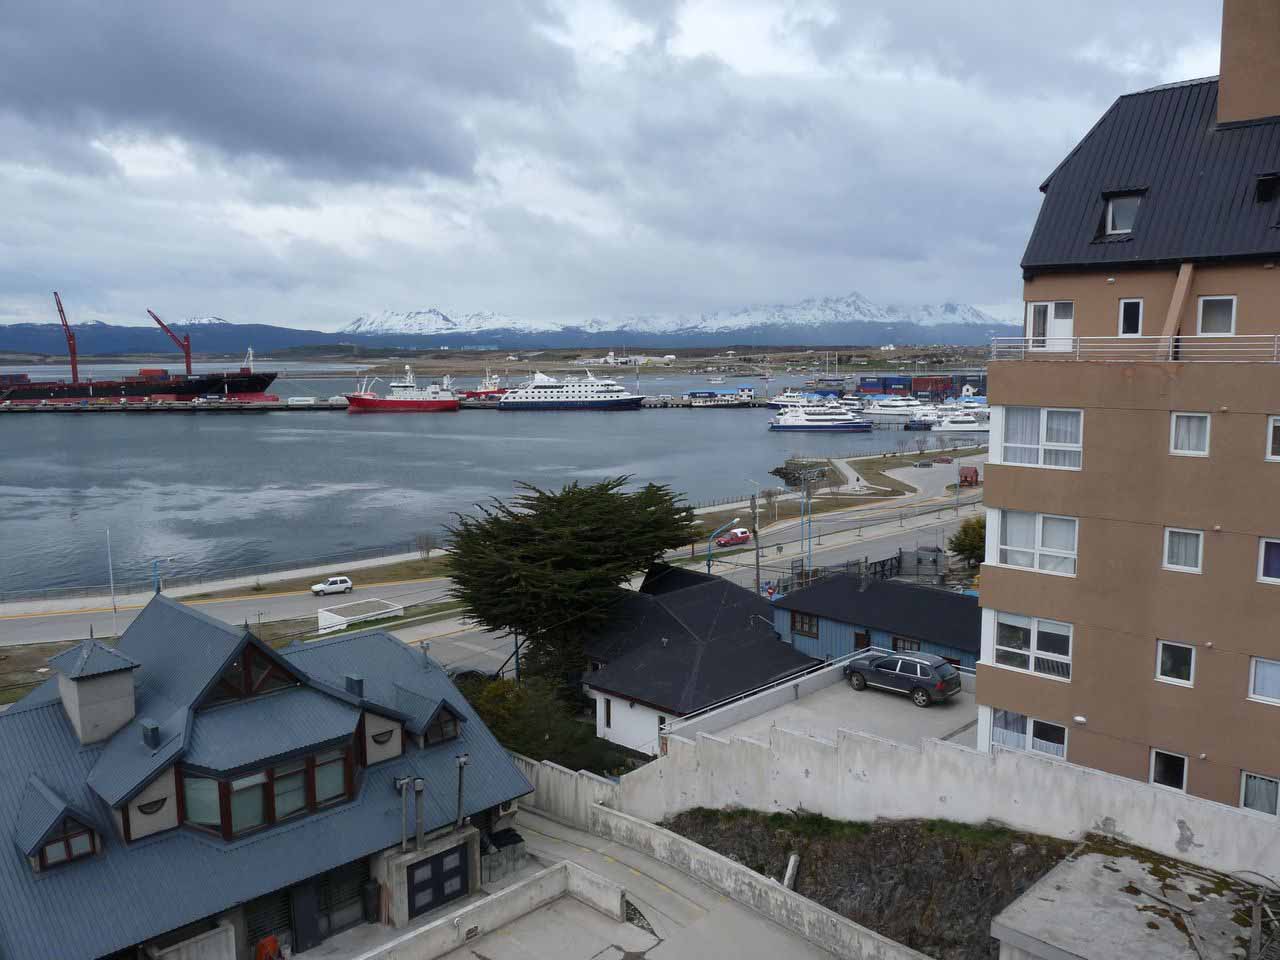  South America | How to spend 72 hours in Ushuaia